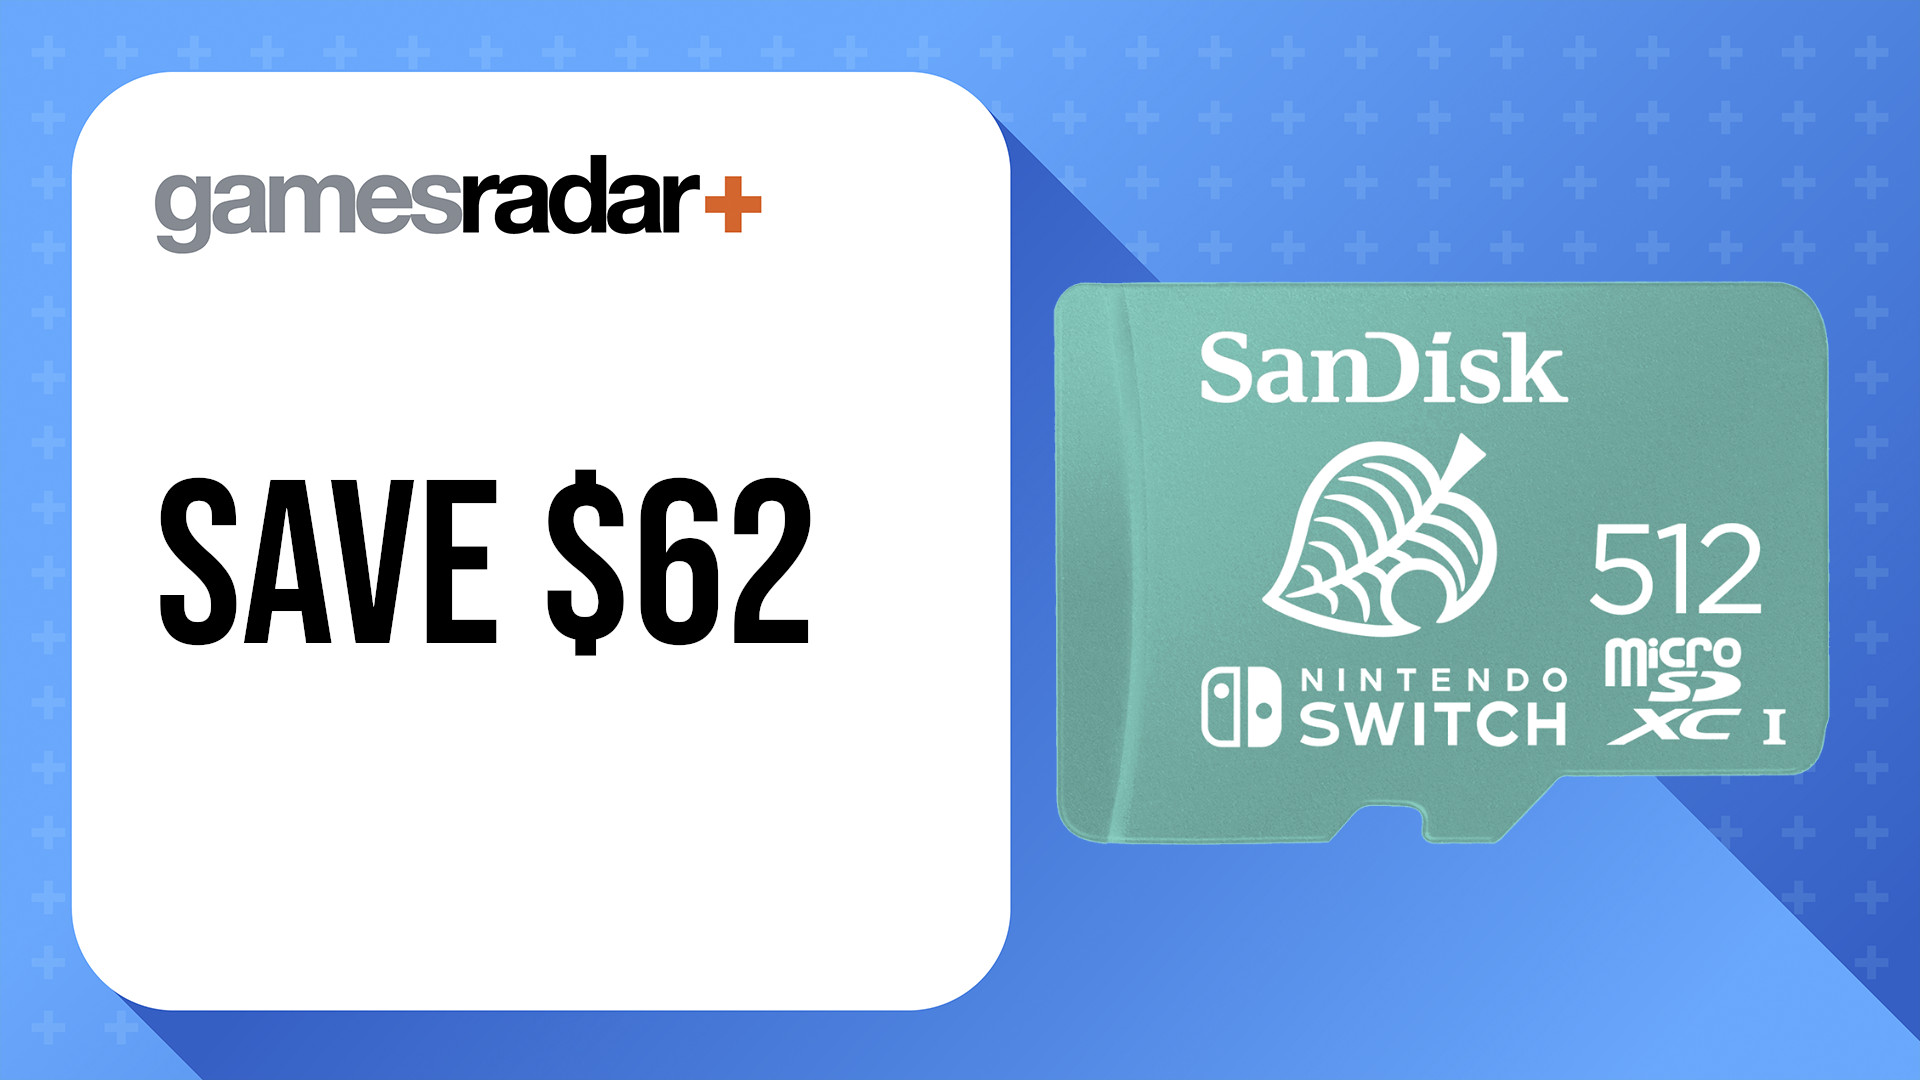 Nintendo Switch Memory Card Offer